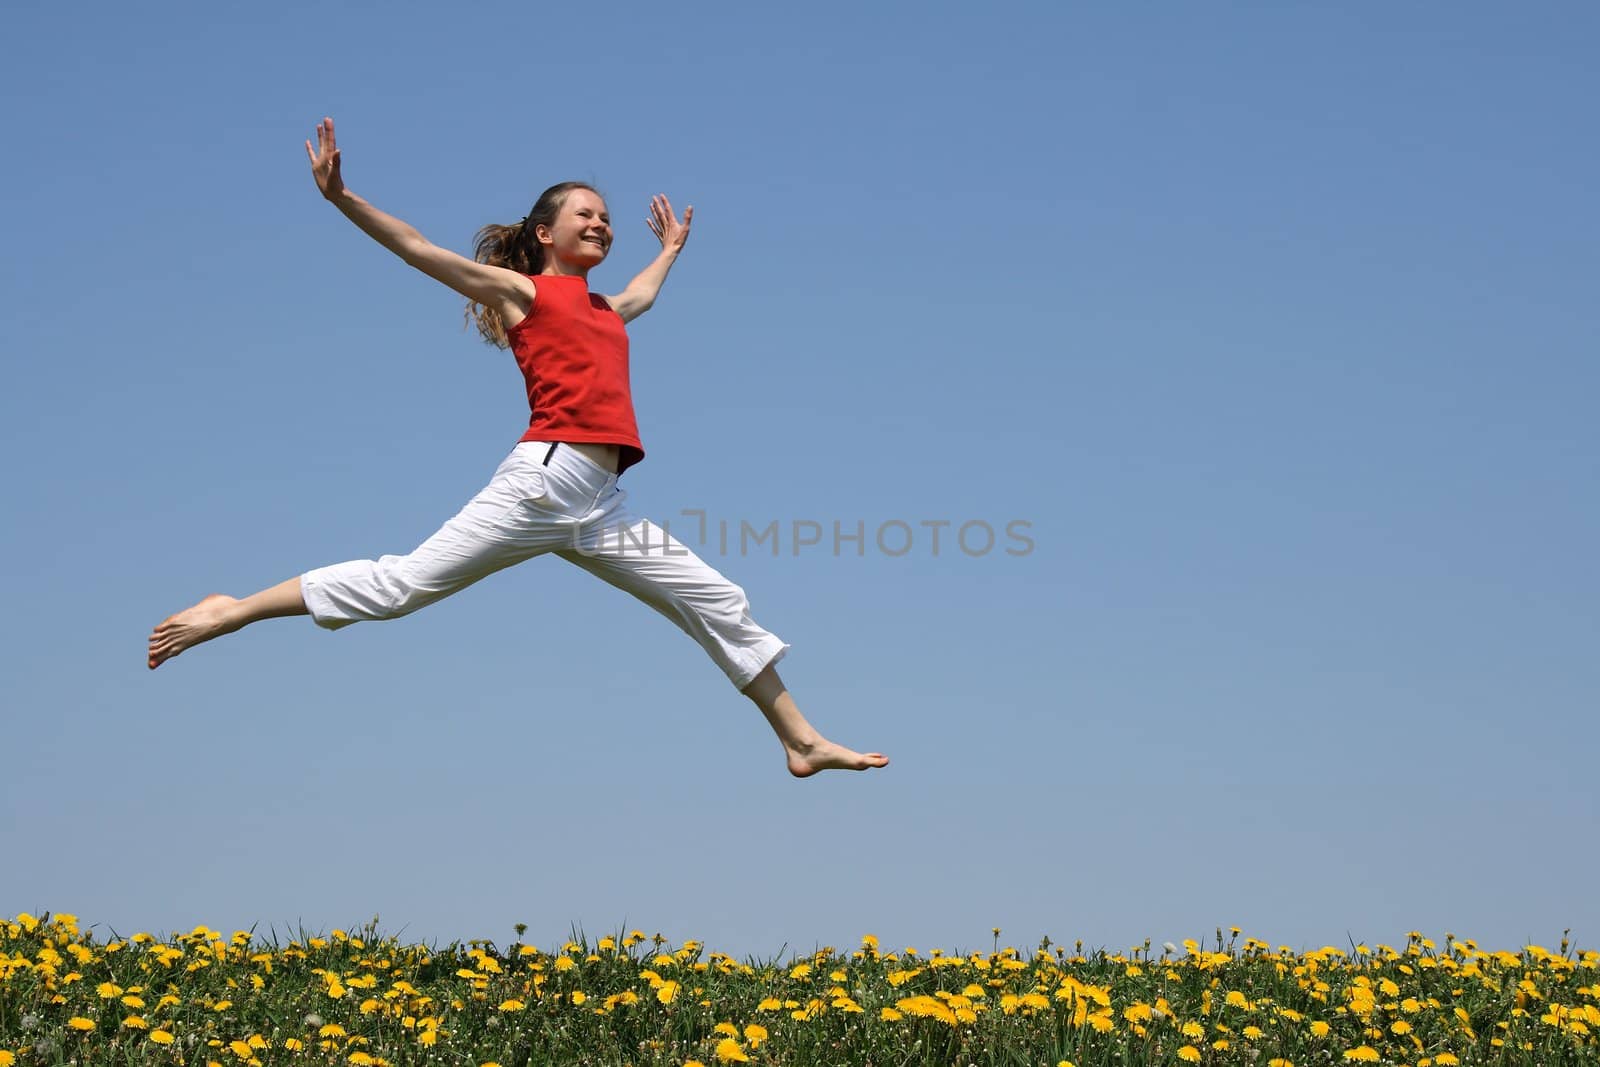 Girl in red t-shirt flying in a jump over flowering dandelion field.